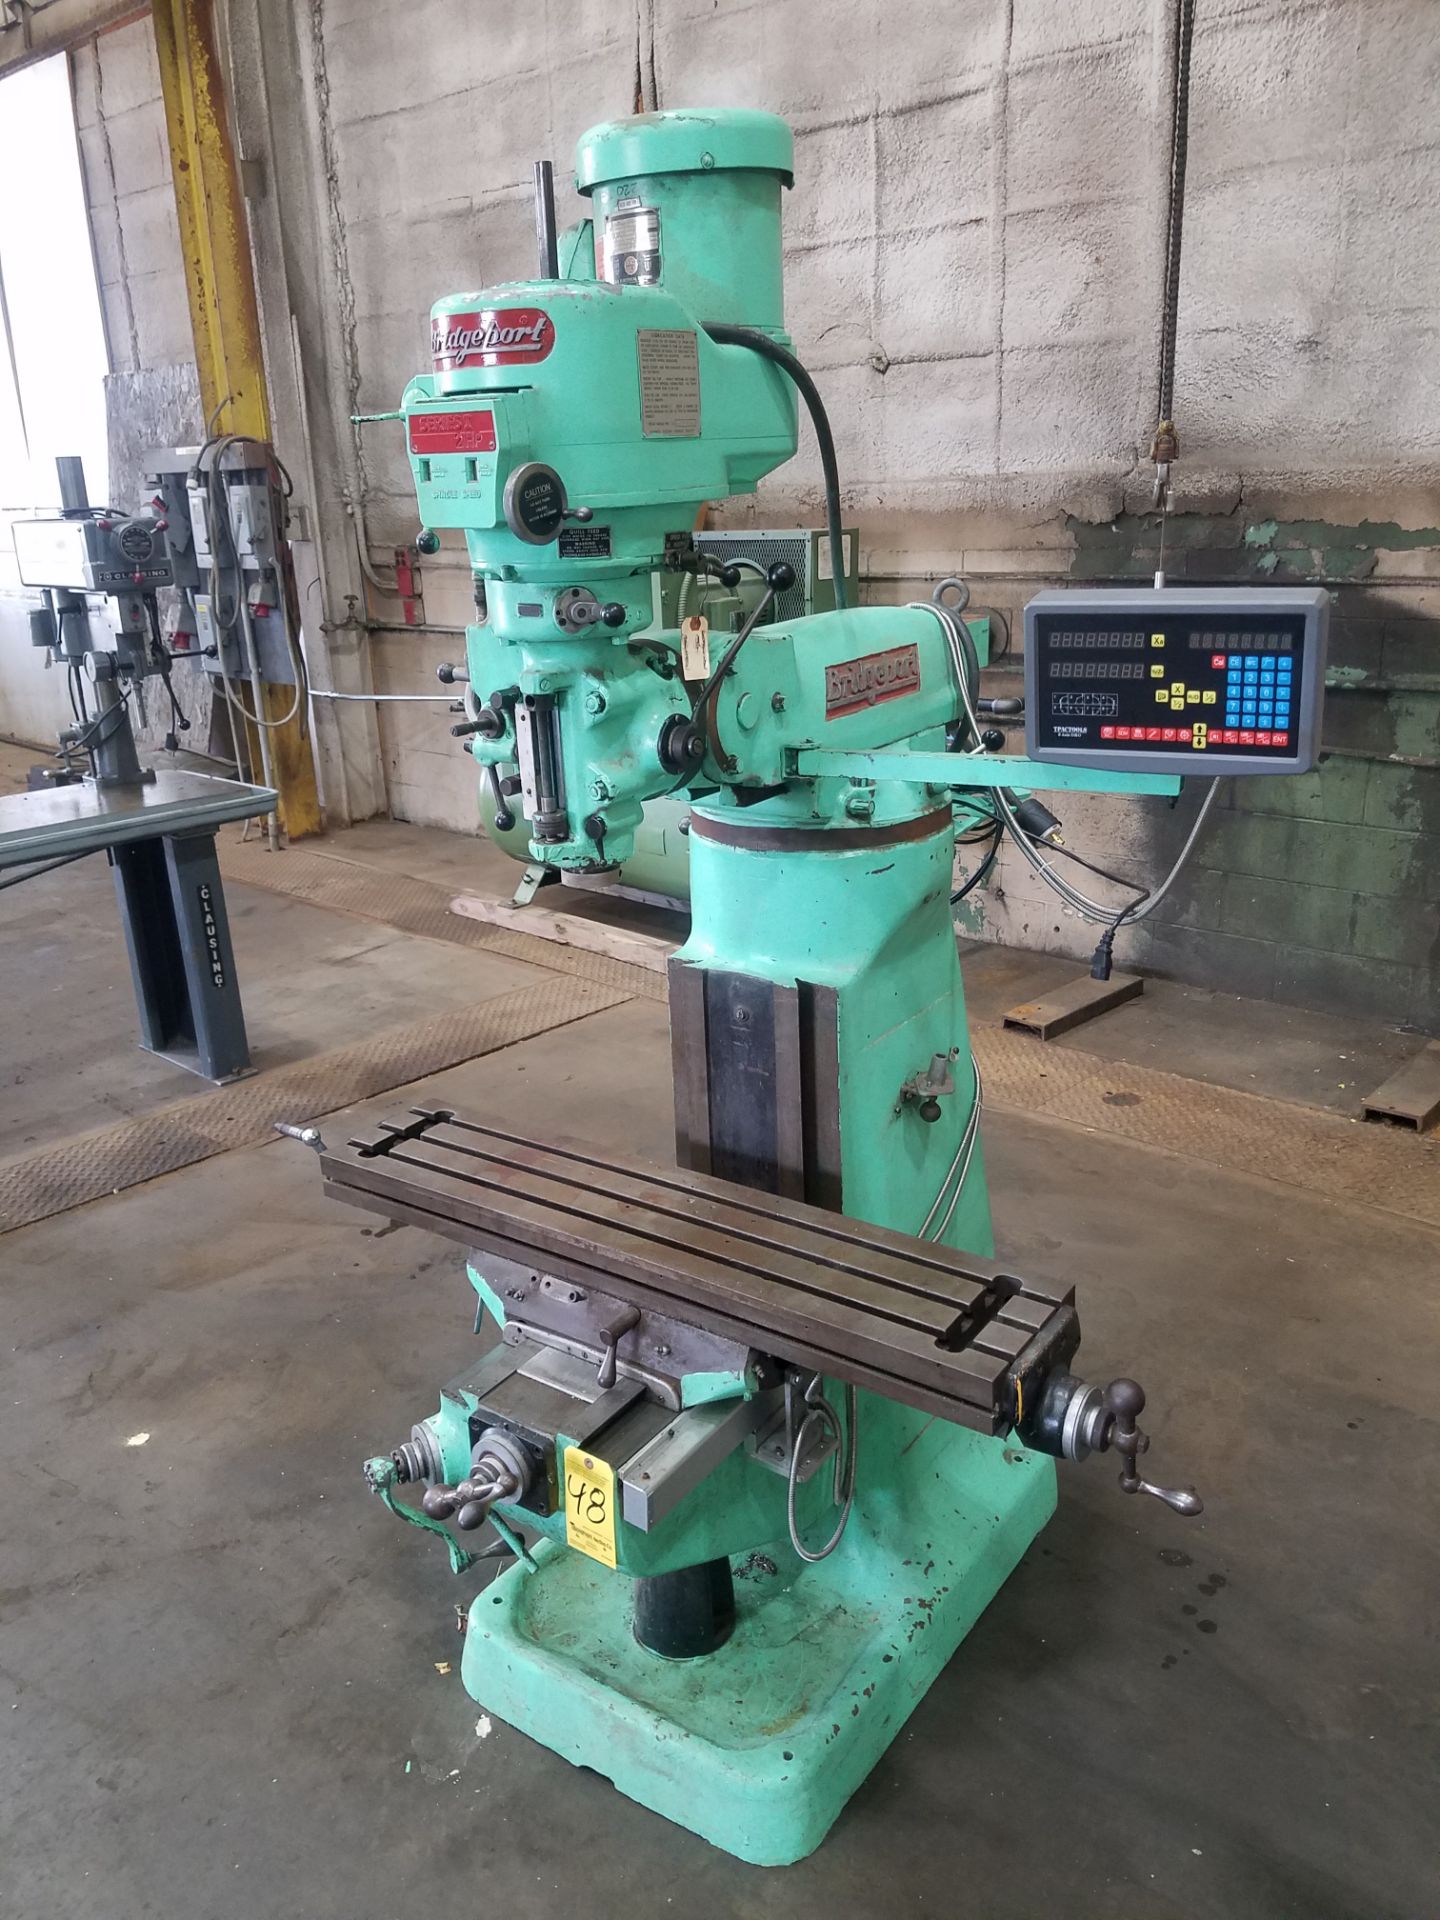 Bridgeport Series I, 2 HP Vertical Mill, s/n BR96723, New 2002, 9” X 42” Table, TPAC D.R.O.